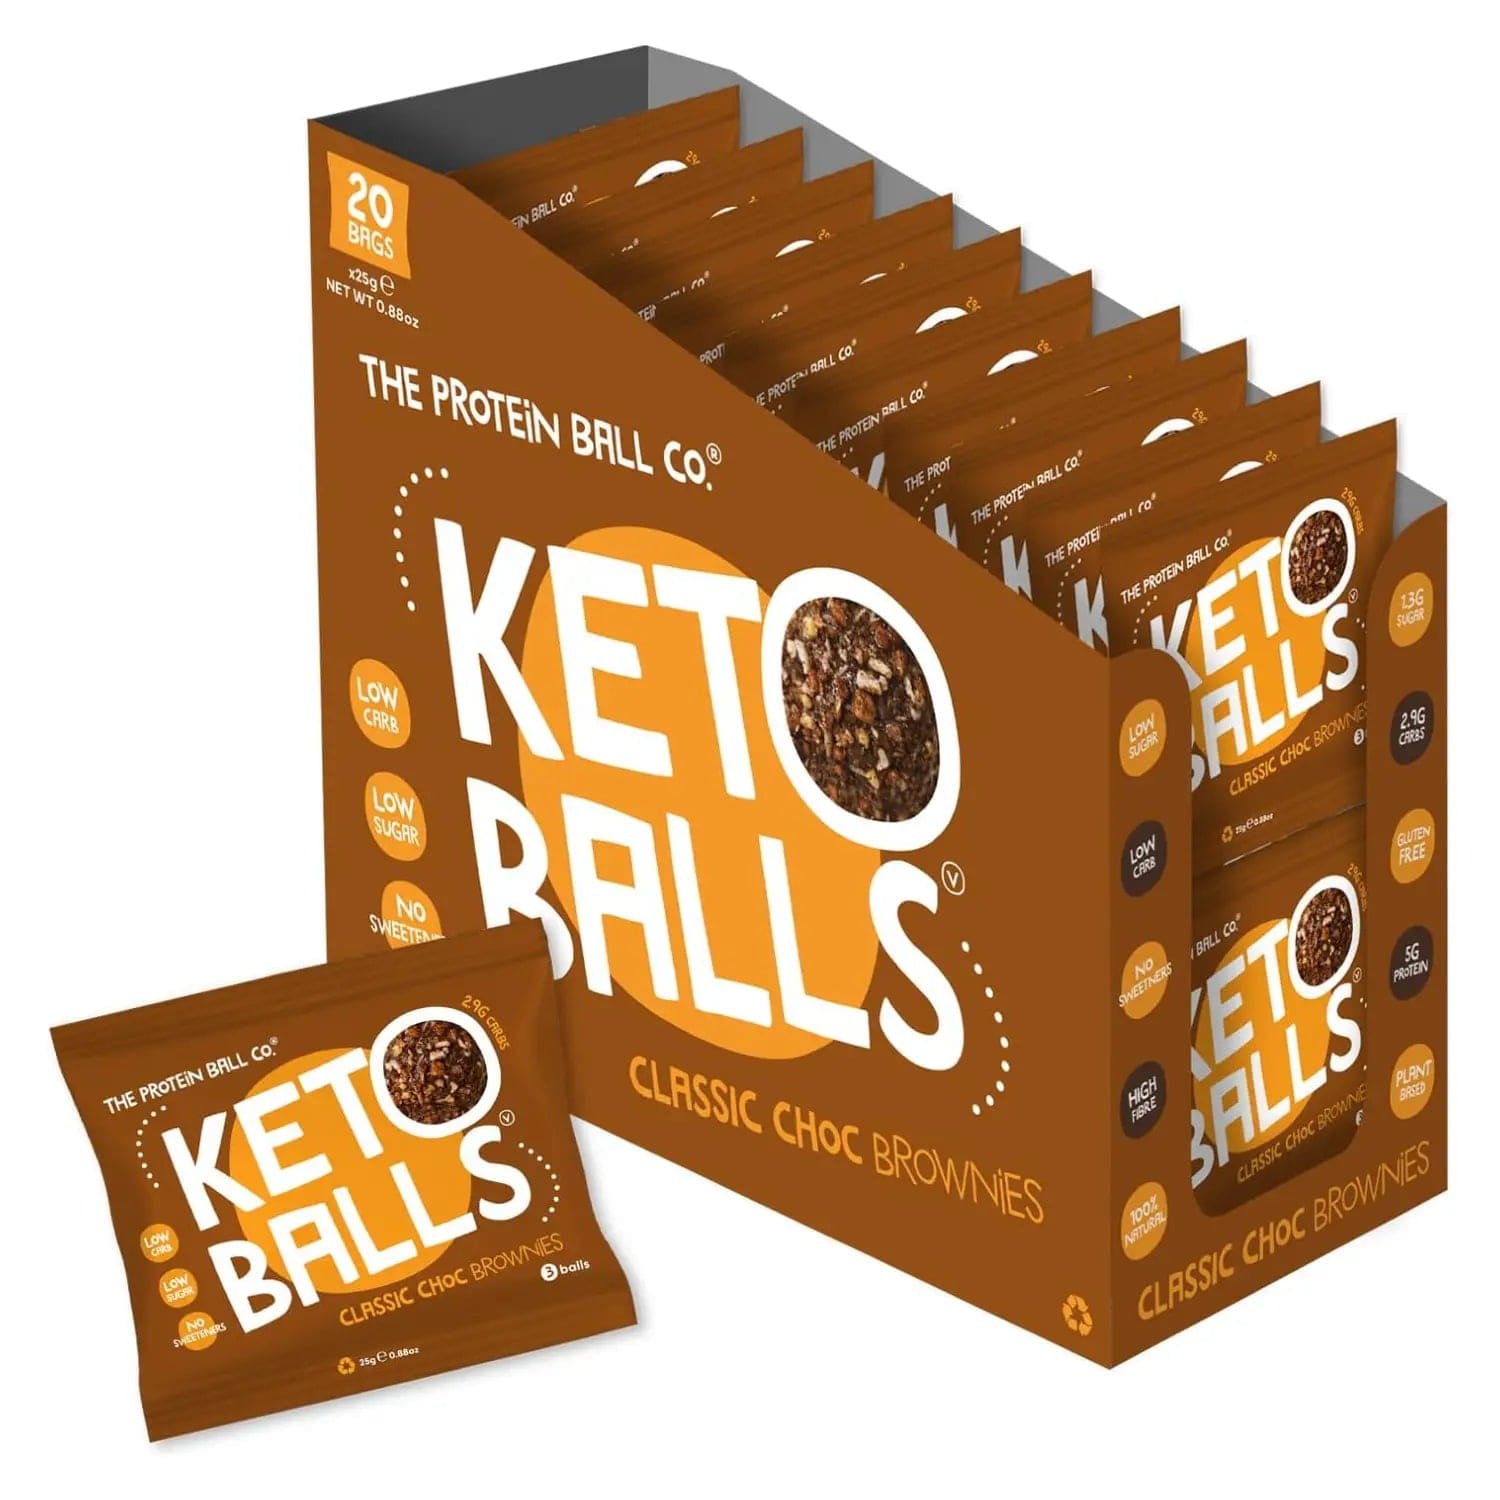 The Protein Ball Co Keto Ball Snack 20 x 25 g Classic Choc Brownies kaufen bei HighPowered.ch